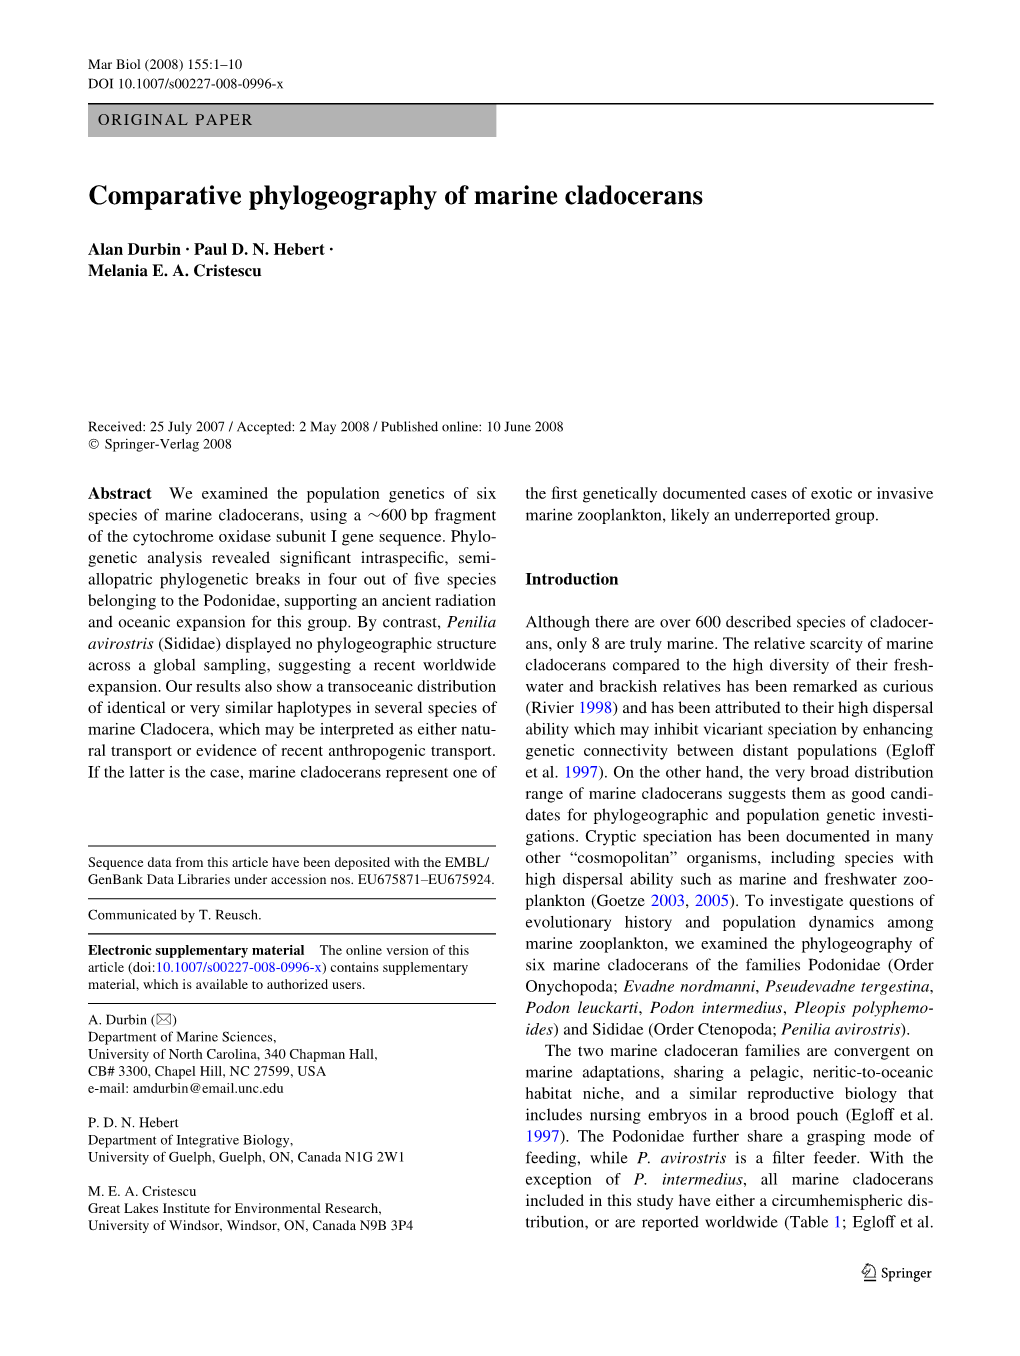 Comparative Phylogeography of Marine Cladocerans